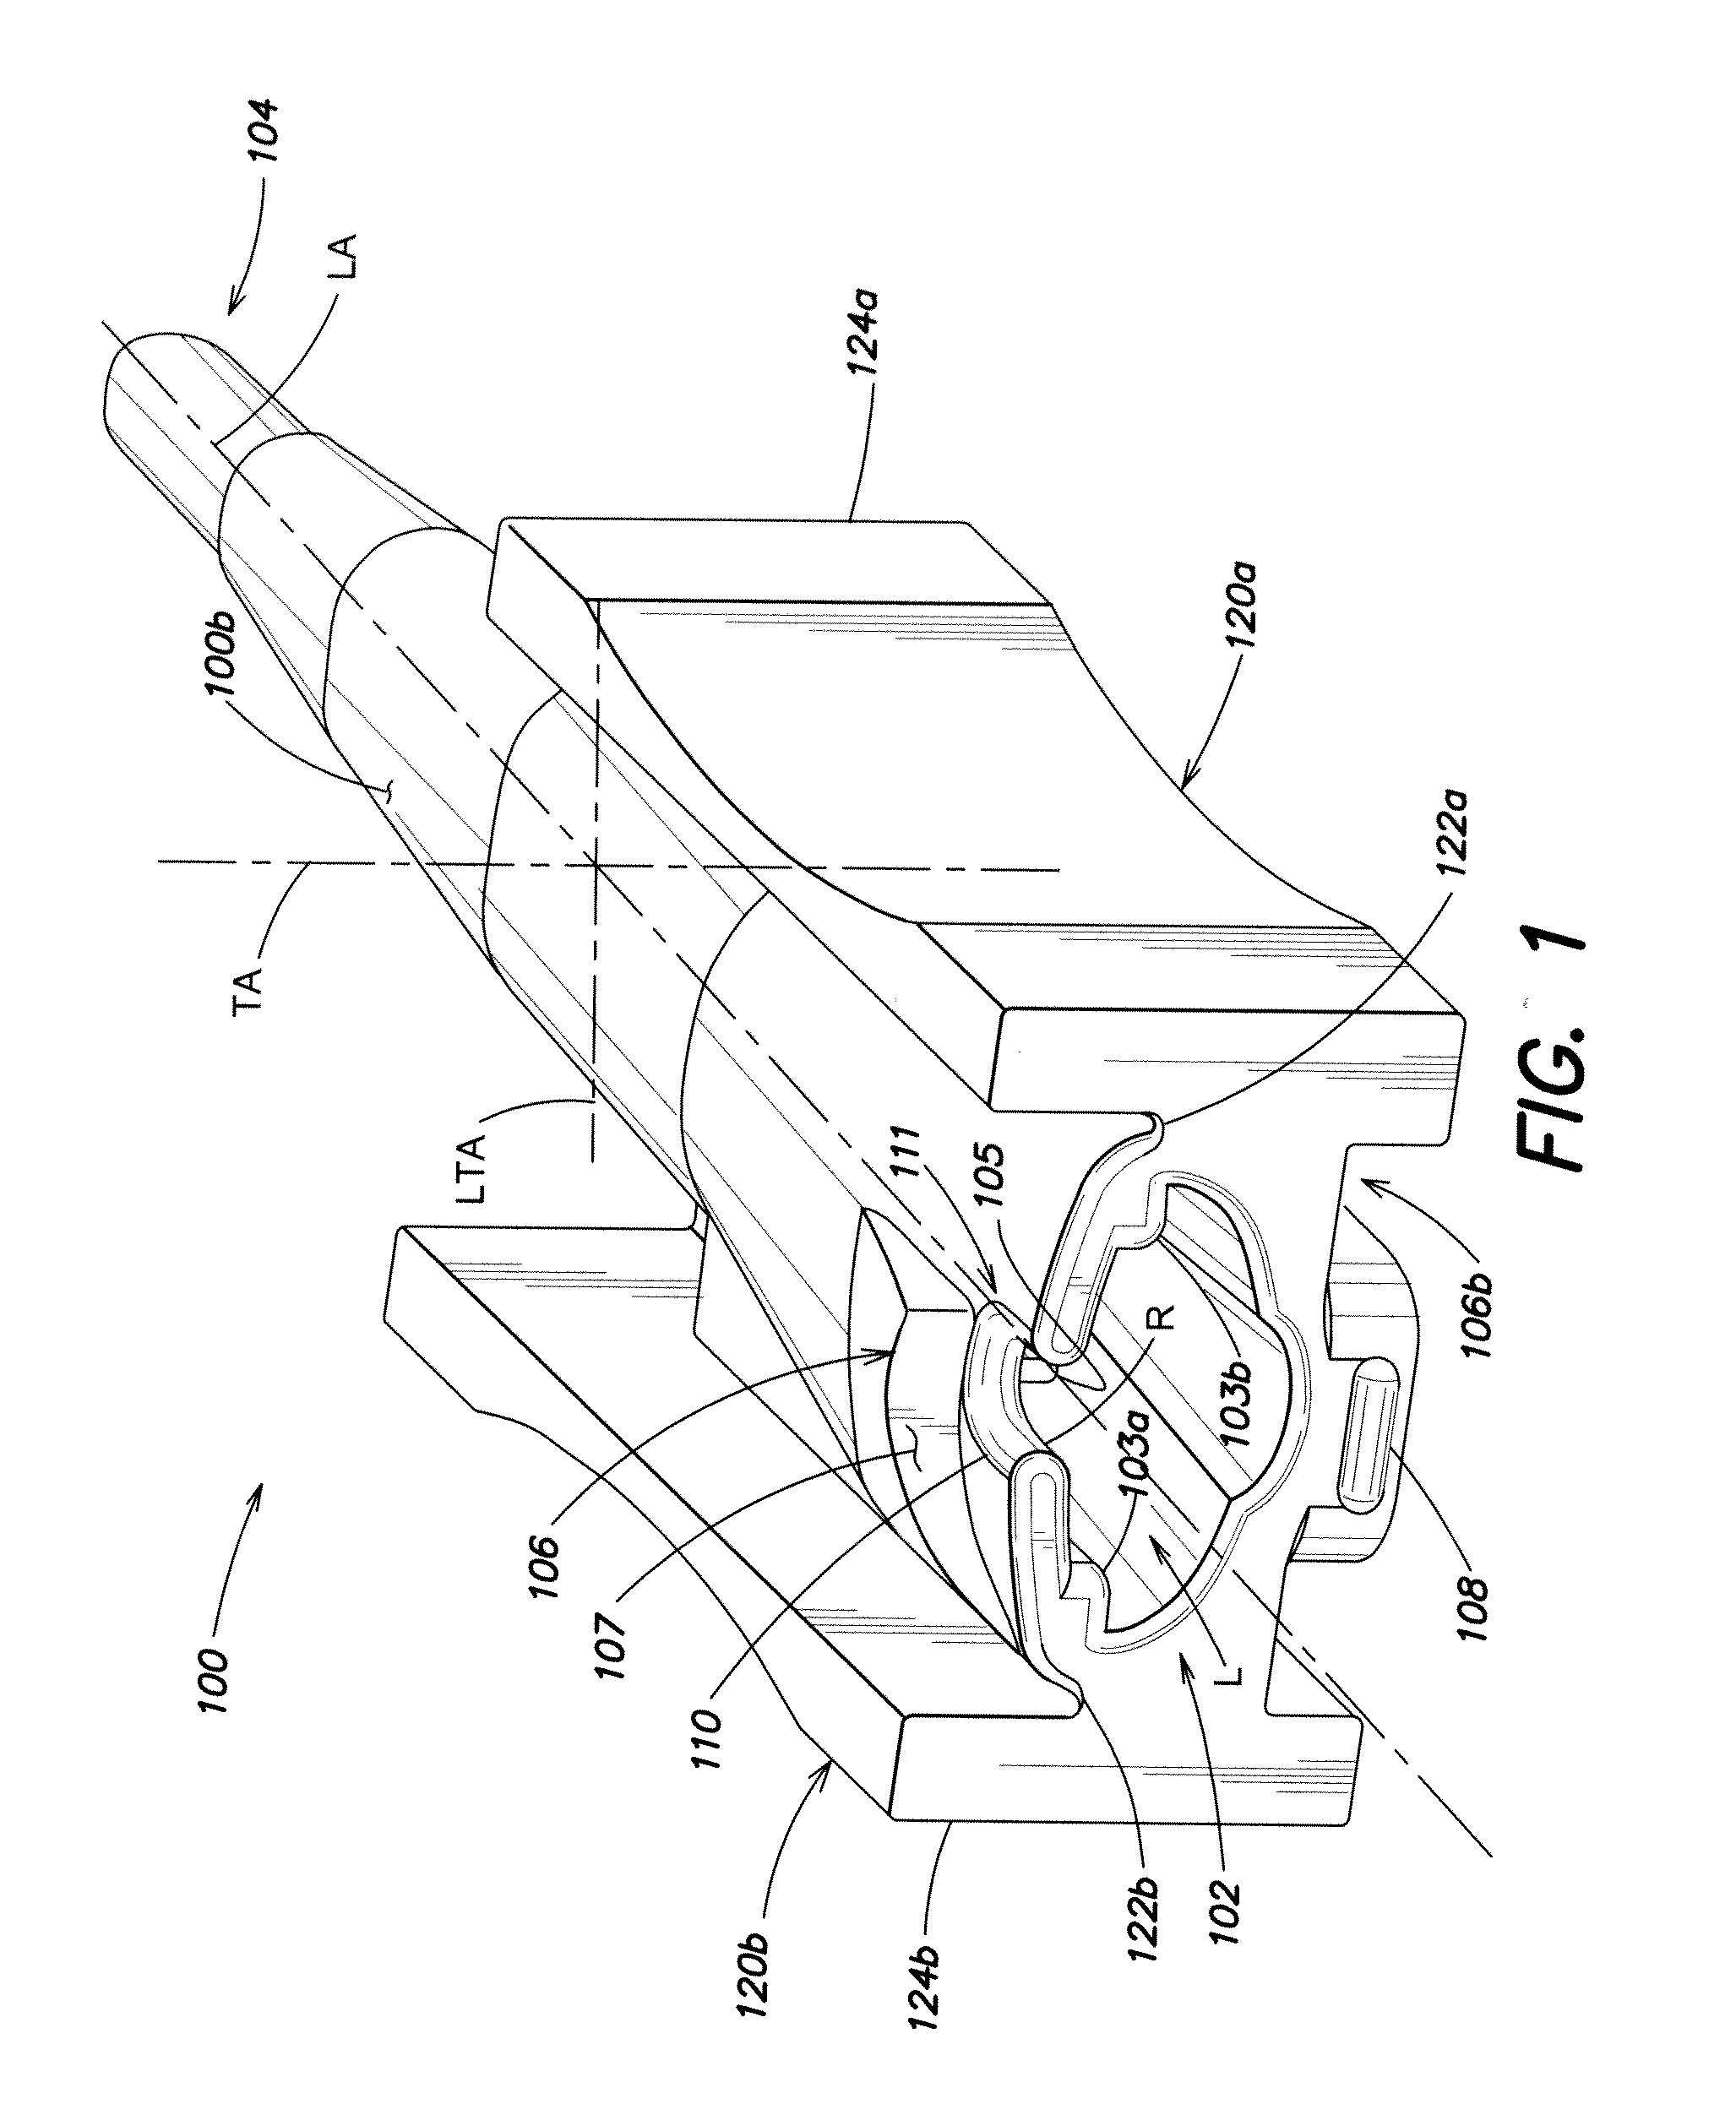 Hingeless Cartridge for Use with an Intraocular Lens Injector Providing Haptic Control